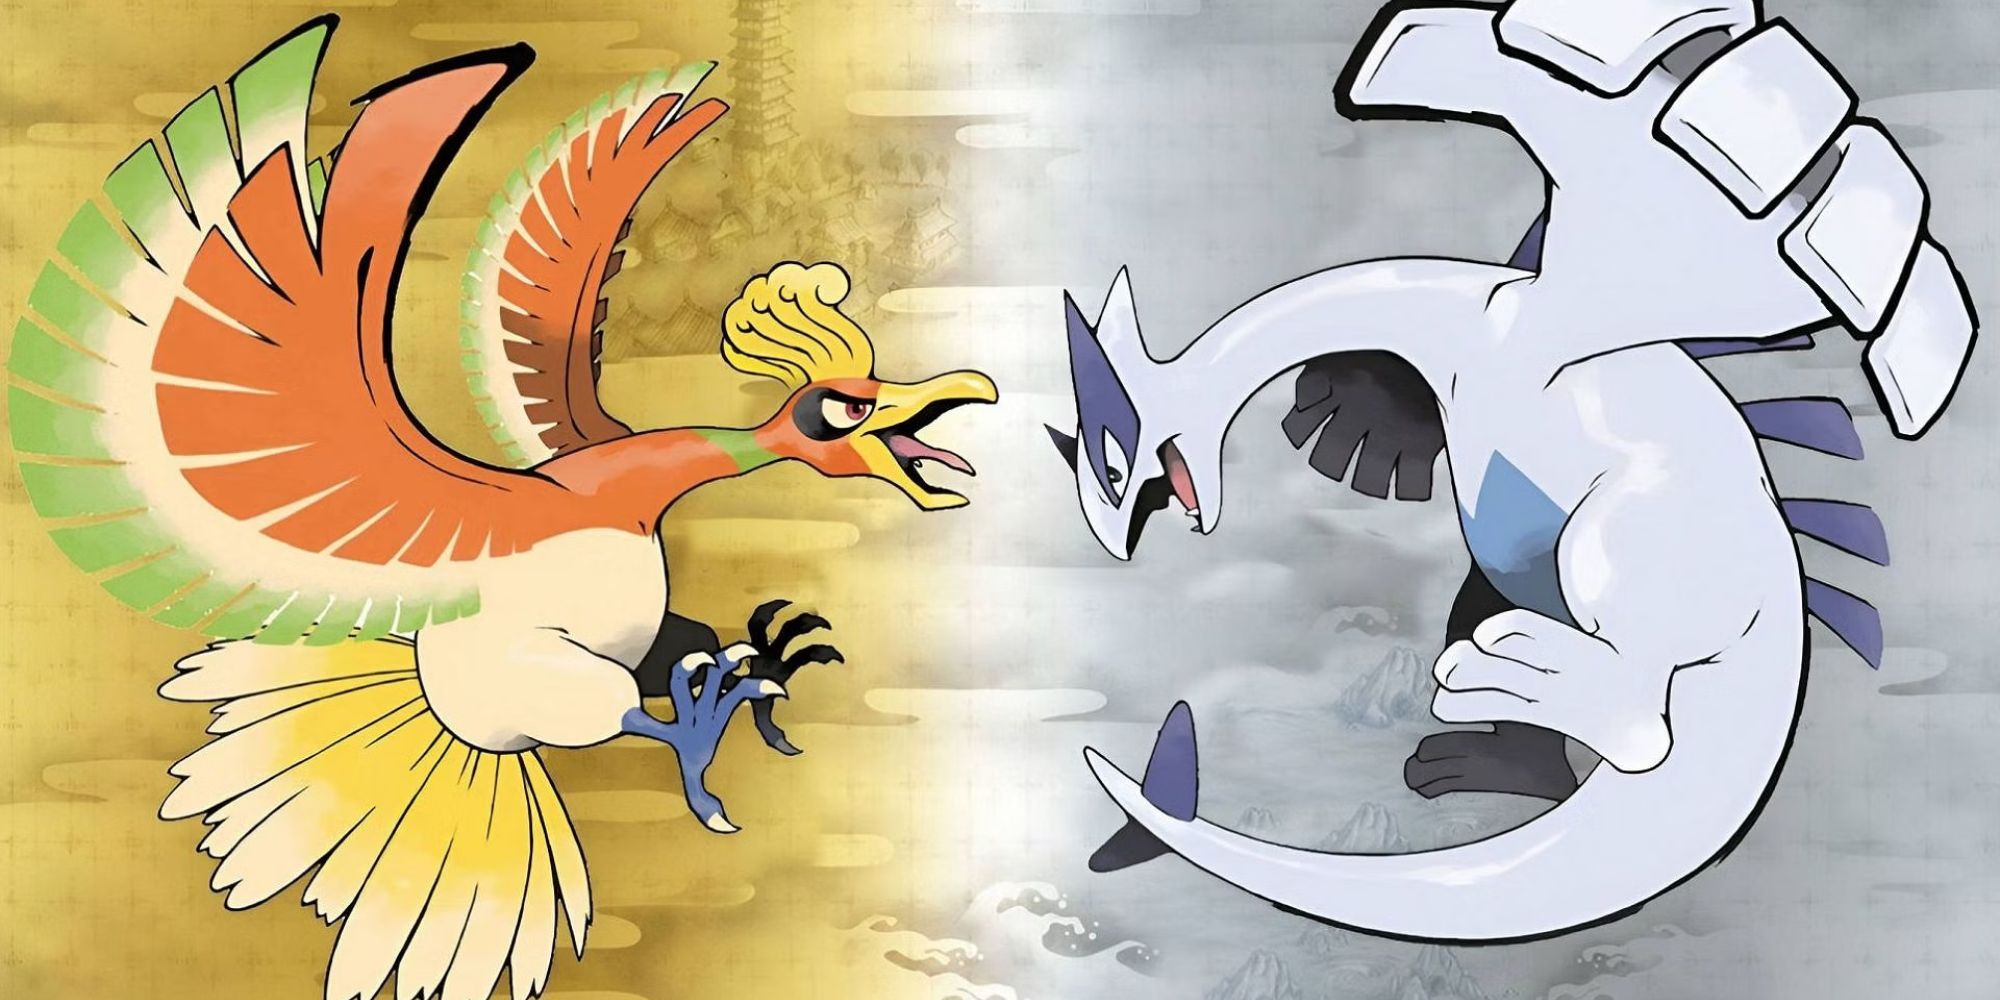 Official art of Ho-oh and Lugia in the covers of Heartgold & Soulsilver.